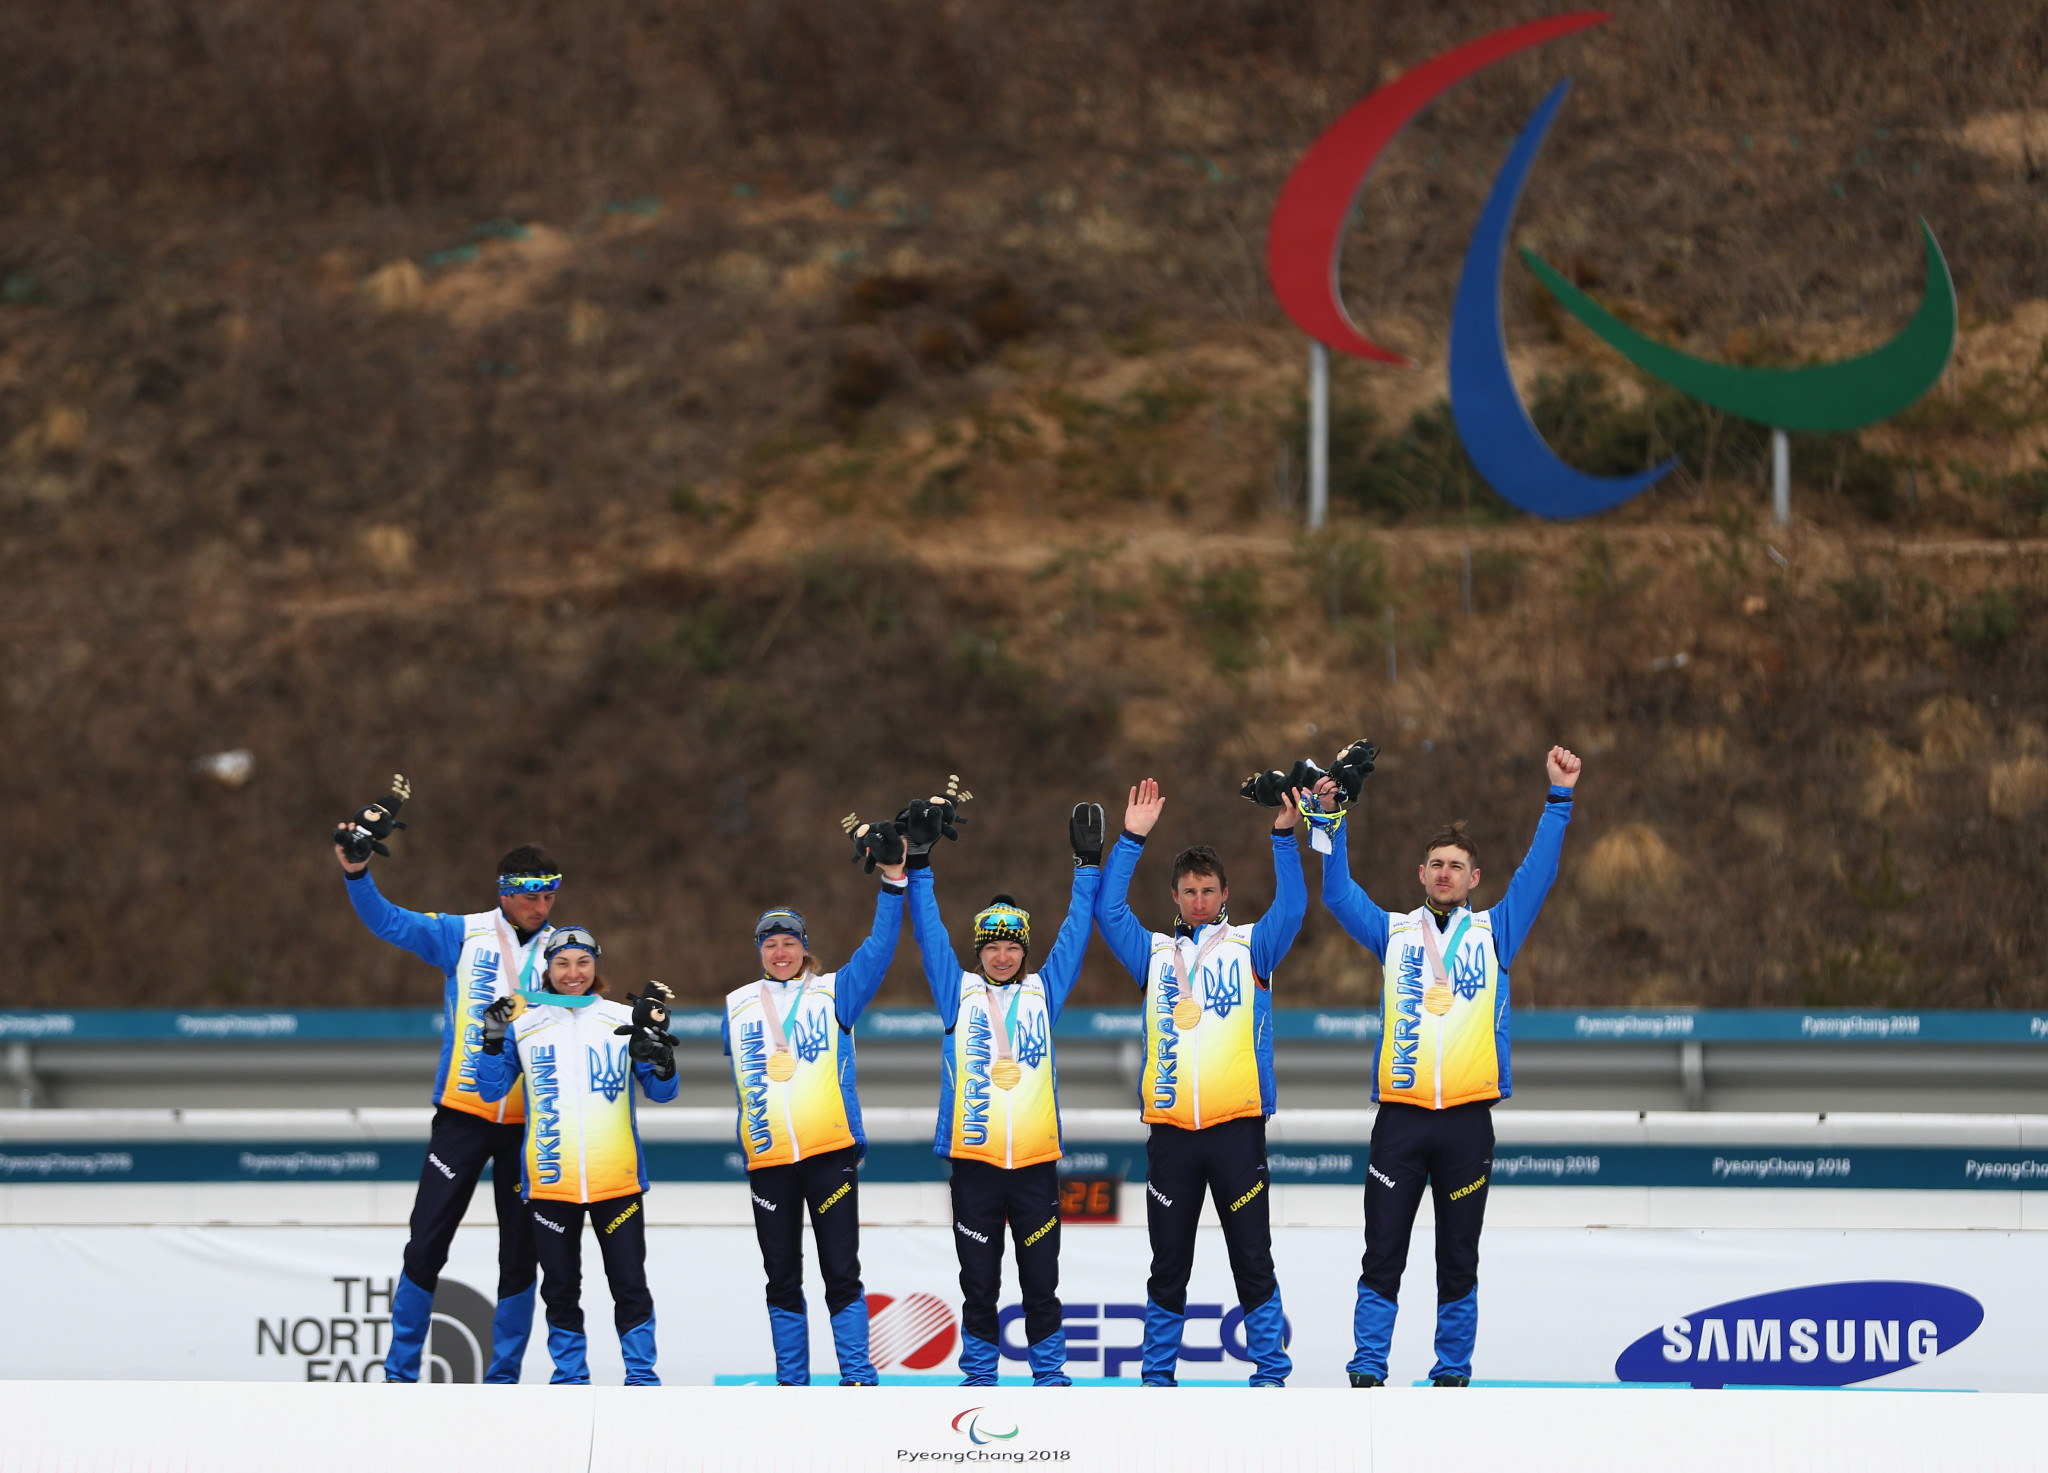 Ukraine won 22 Paralympic medals at Pyeongchang 2018 ©Getty Images